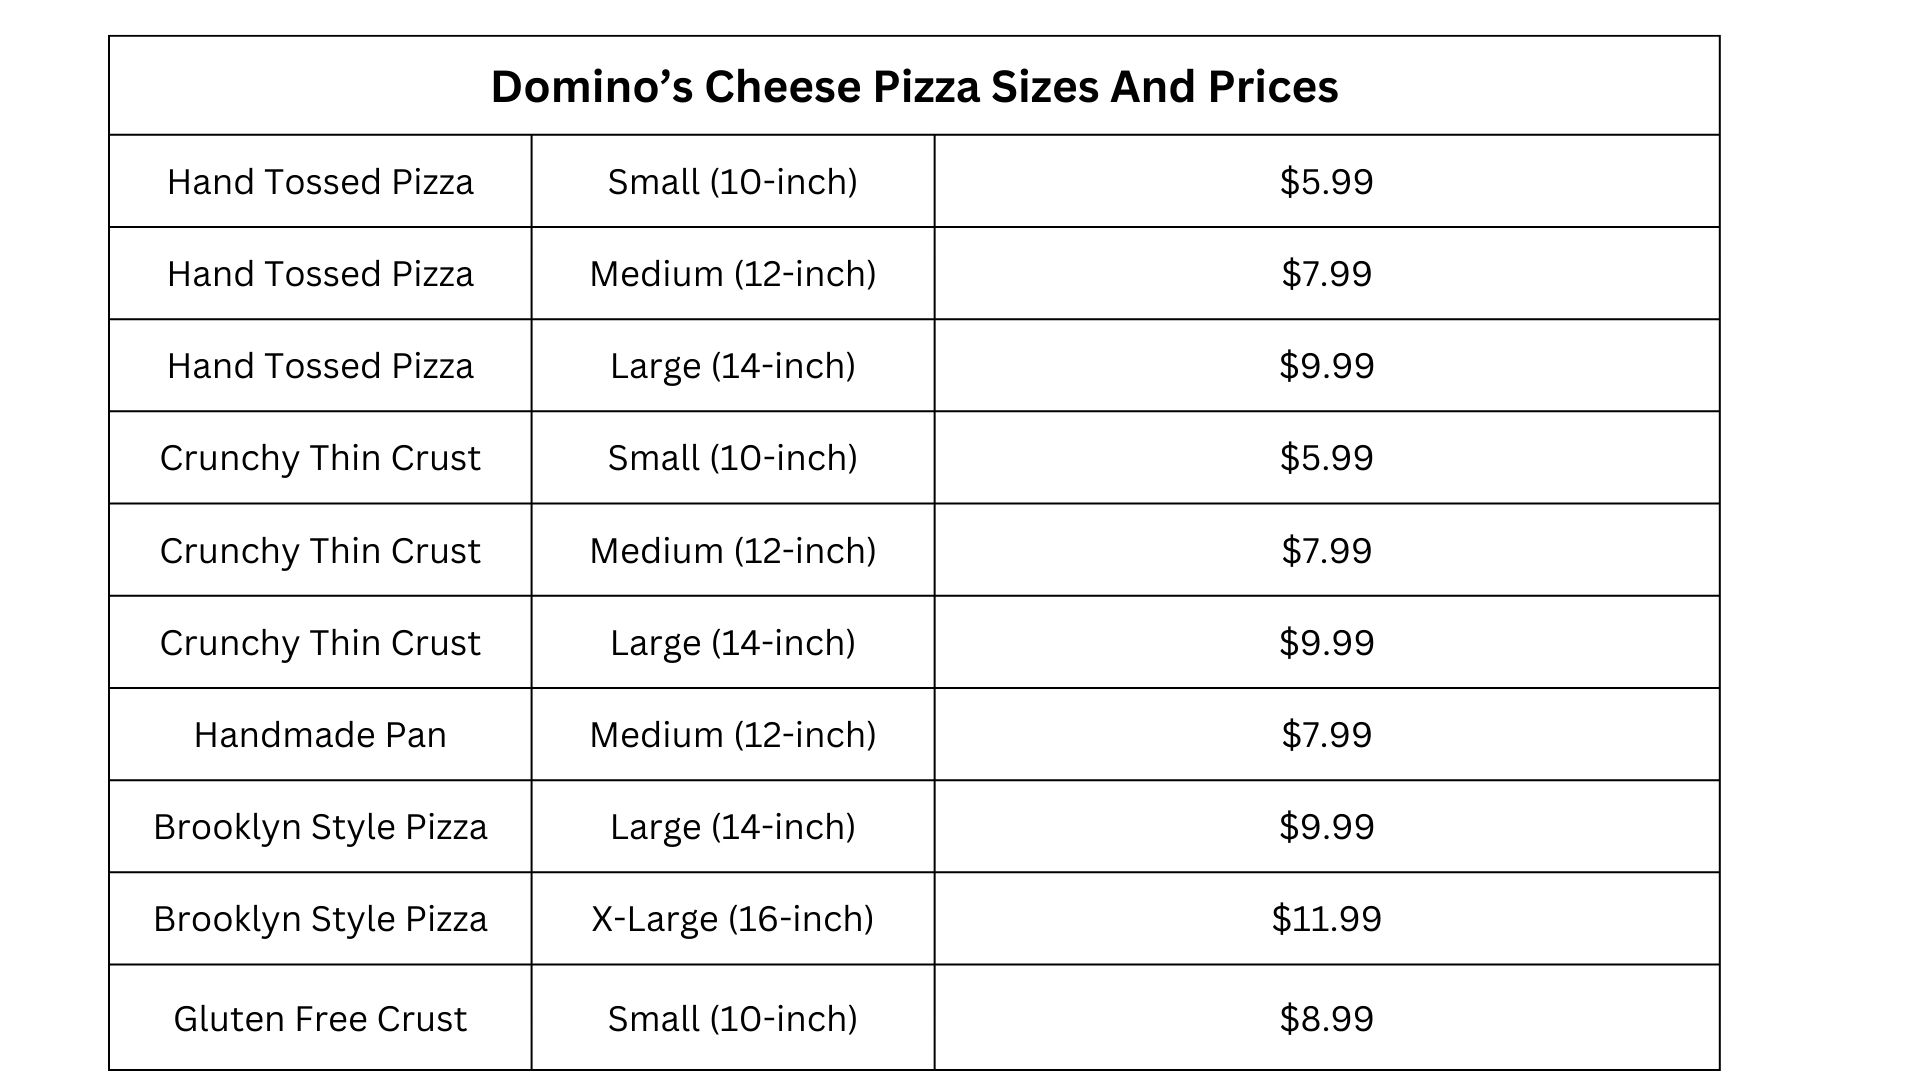 Domino’s Cheese Pizza Sizes And Price